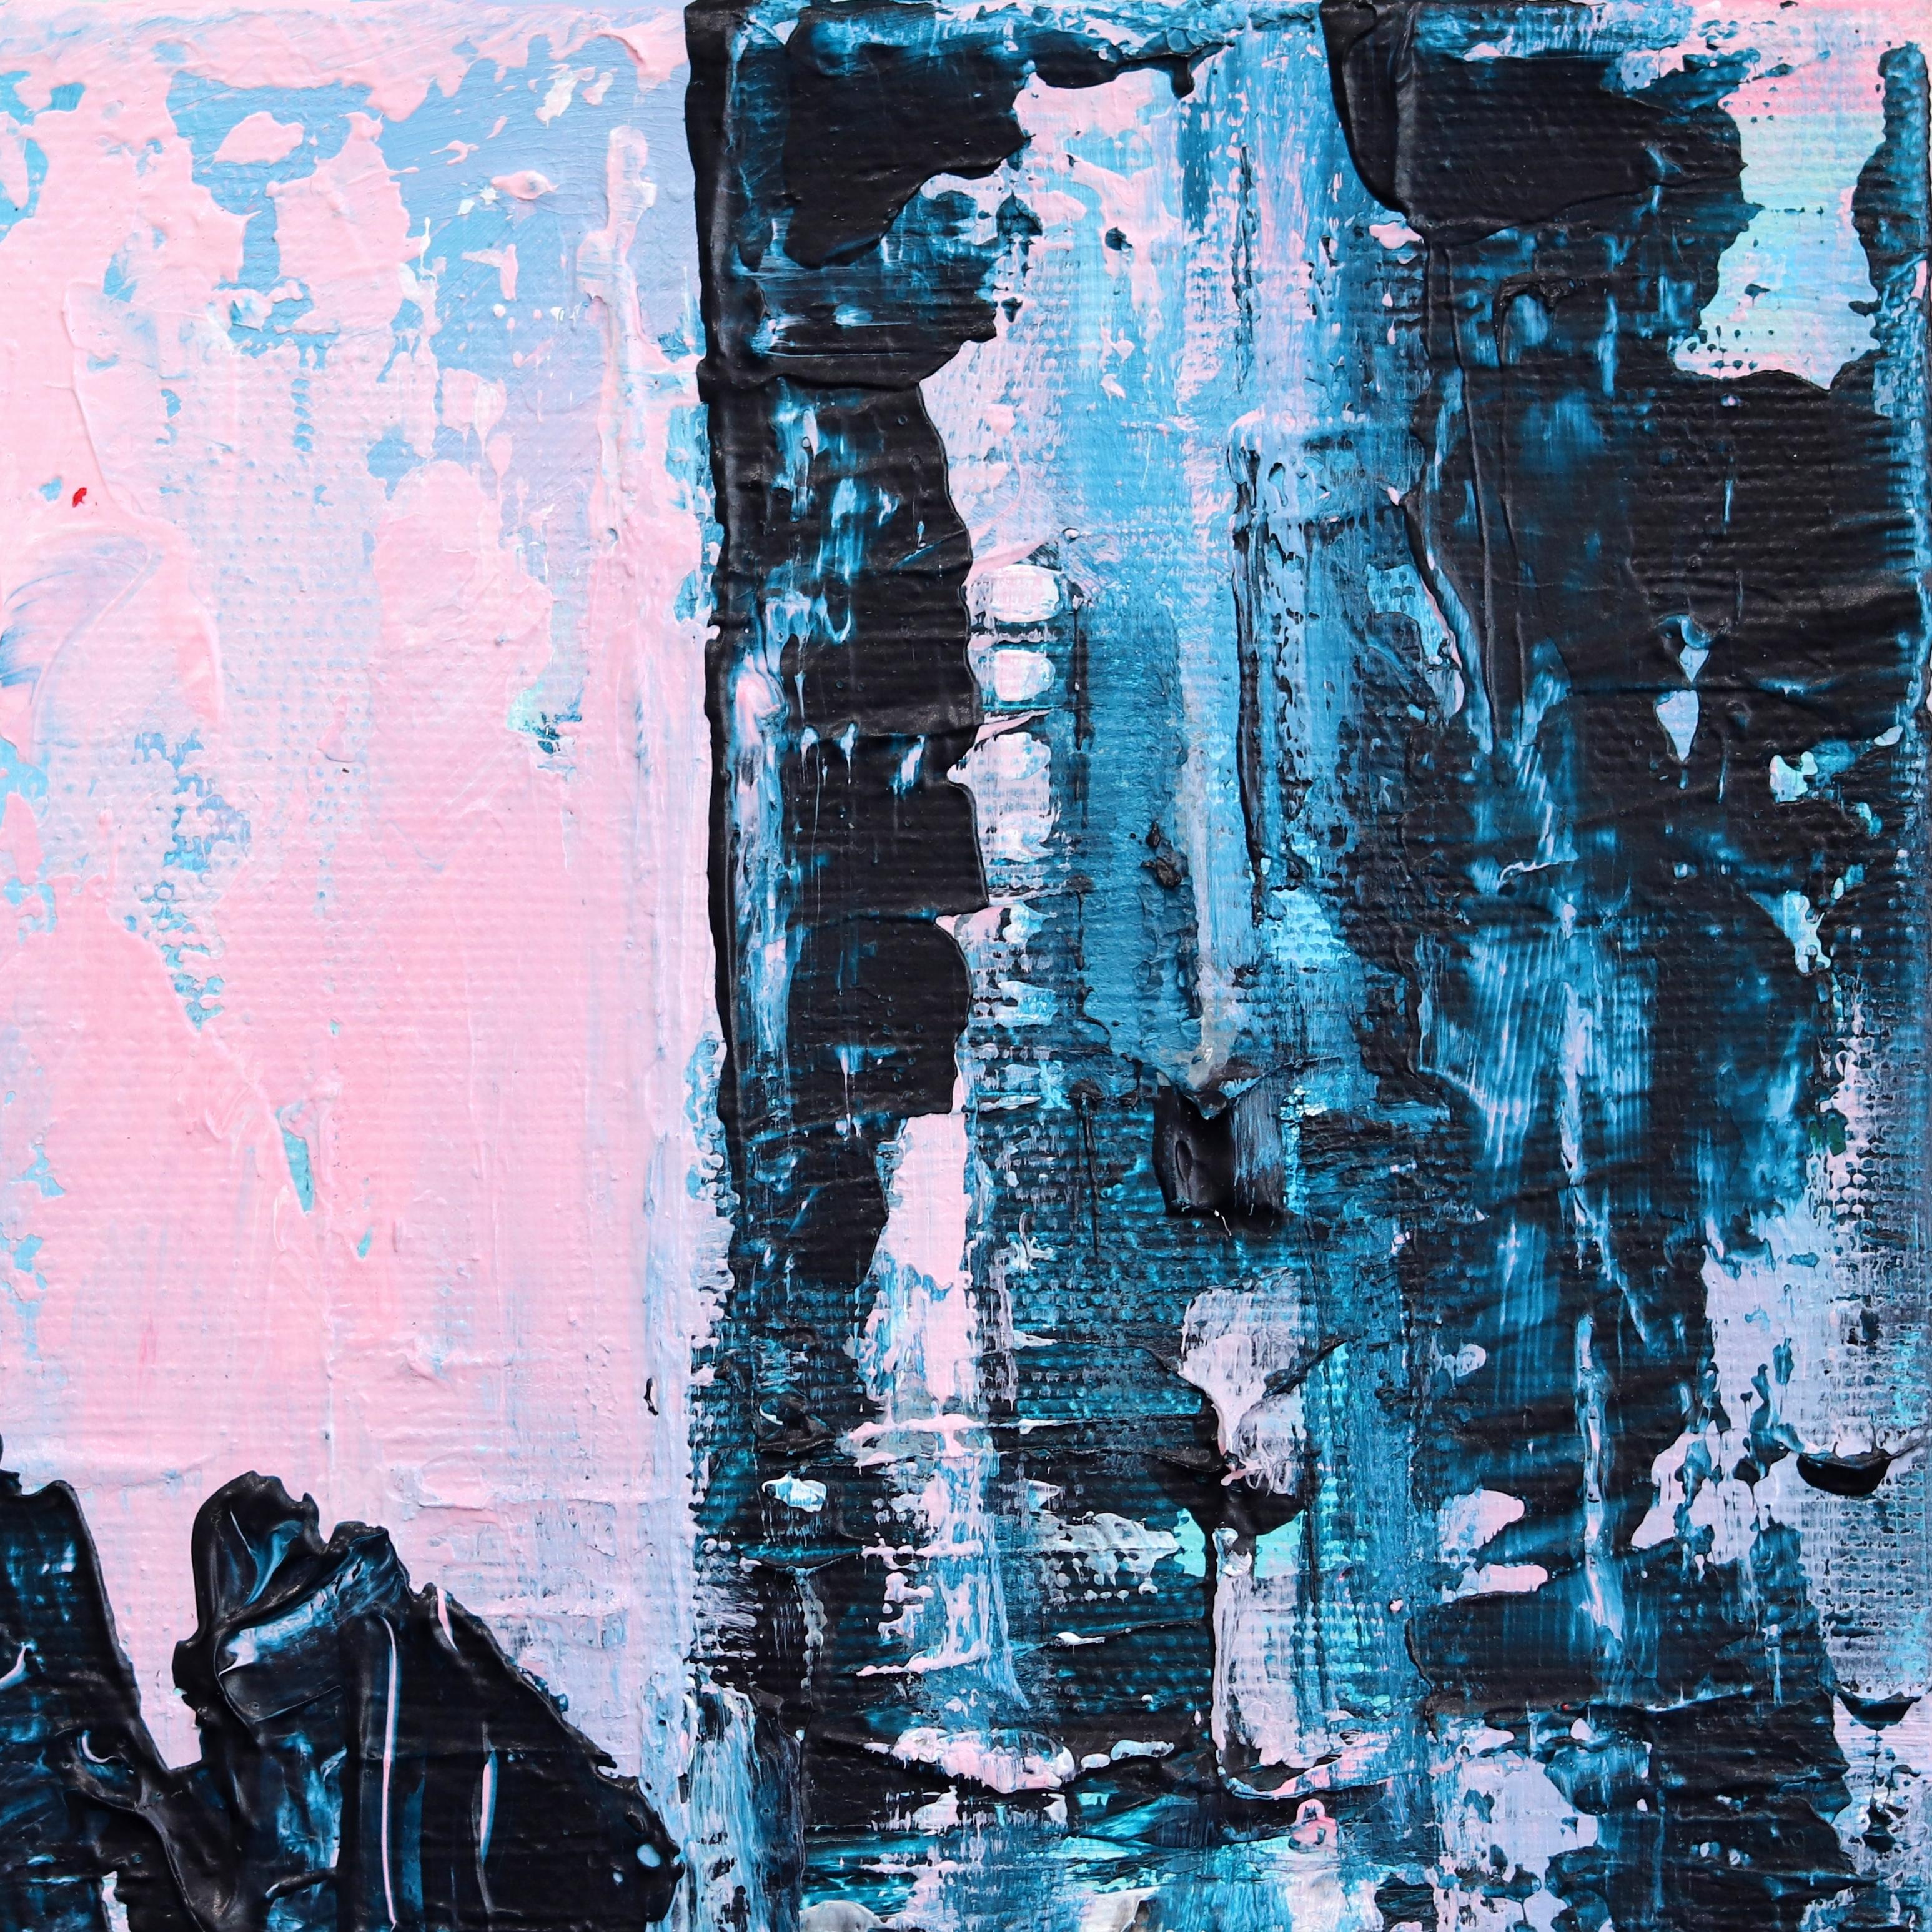 Ivana Milosevic creates vibrant, yet soothing water landscapes that emphasize color and texture. She uses palette knives and brushes to carve details into layers of paint. They reflect a form of abstraction through the simplification of composition